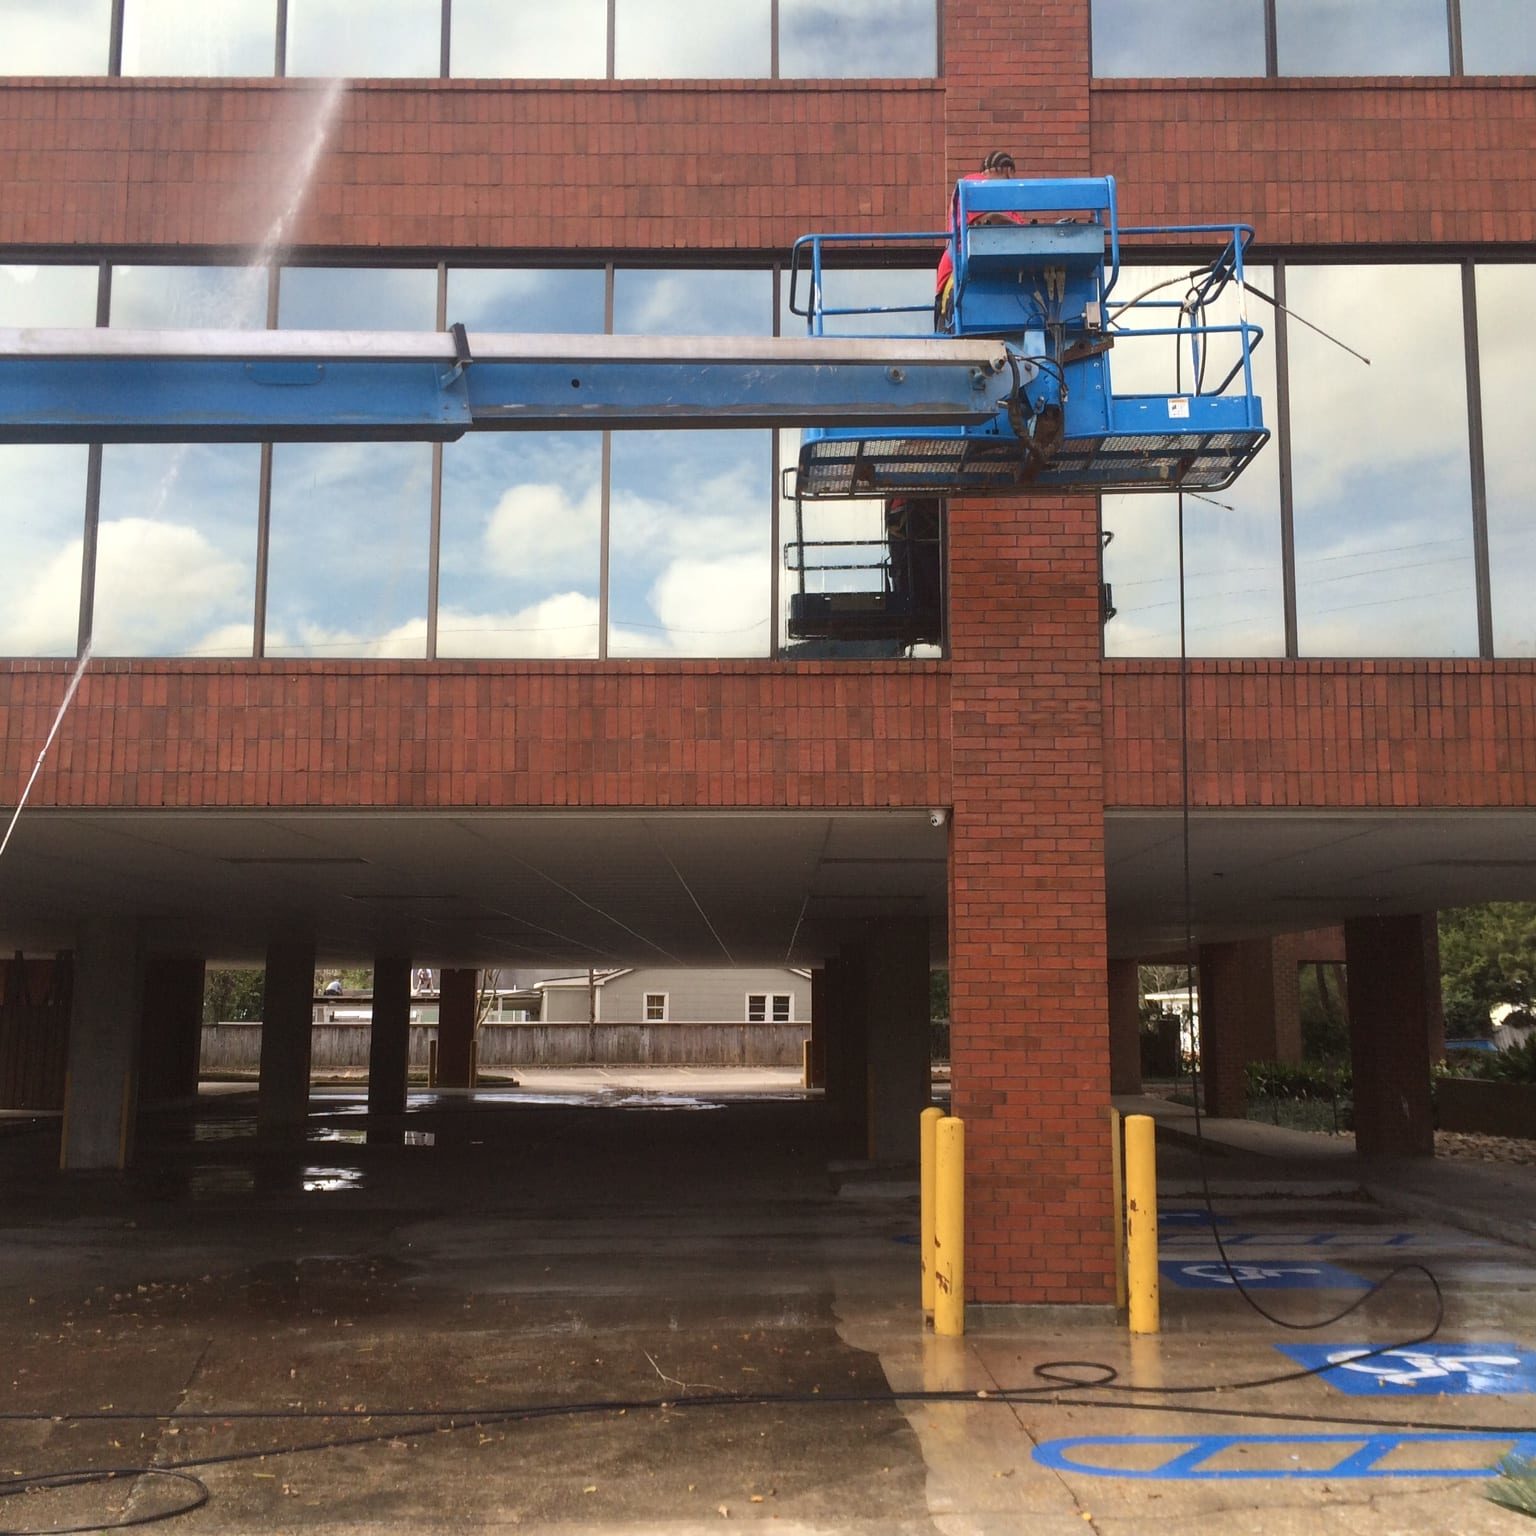 Pressure Washing and Window Cleaning Keeping your windows, storefront, concrete sidewalk, and the rest of your building exterior clean presents a professional image to your clients making them more likely to trust the products and services your company provides. Our Pressure Washing and Window Cleaning Service is the solution to that need and we provide Louisiana business owners a way to achieve and keep that clean image without the hassle. Our Services Include: Commercial Pressure Cleaning - Building washing, parking lot cleaning, graffiti removal, and more Commercial Window Cleaning - Window washing, interior, and exterior window cleaning Oilfield Cleaning Services - Keep excess oil, grit, and grime clear of your equipment Unlike national commercial property maintenance companies, we don't use subcontractors – further ensuring that we keep our quality standards the highest in the region. We also service Texas, Mississippi, and Arkansas for routine servicing. If you are interested in our services but you are outside our service area, please give us a call and we can find an option that will work for you.